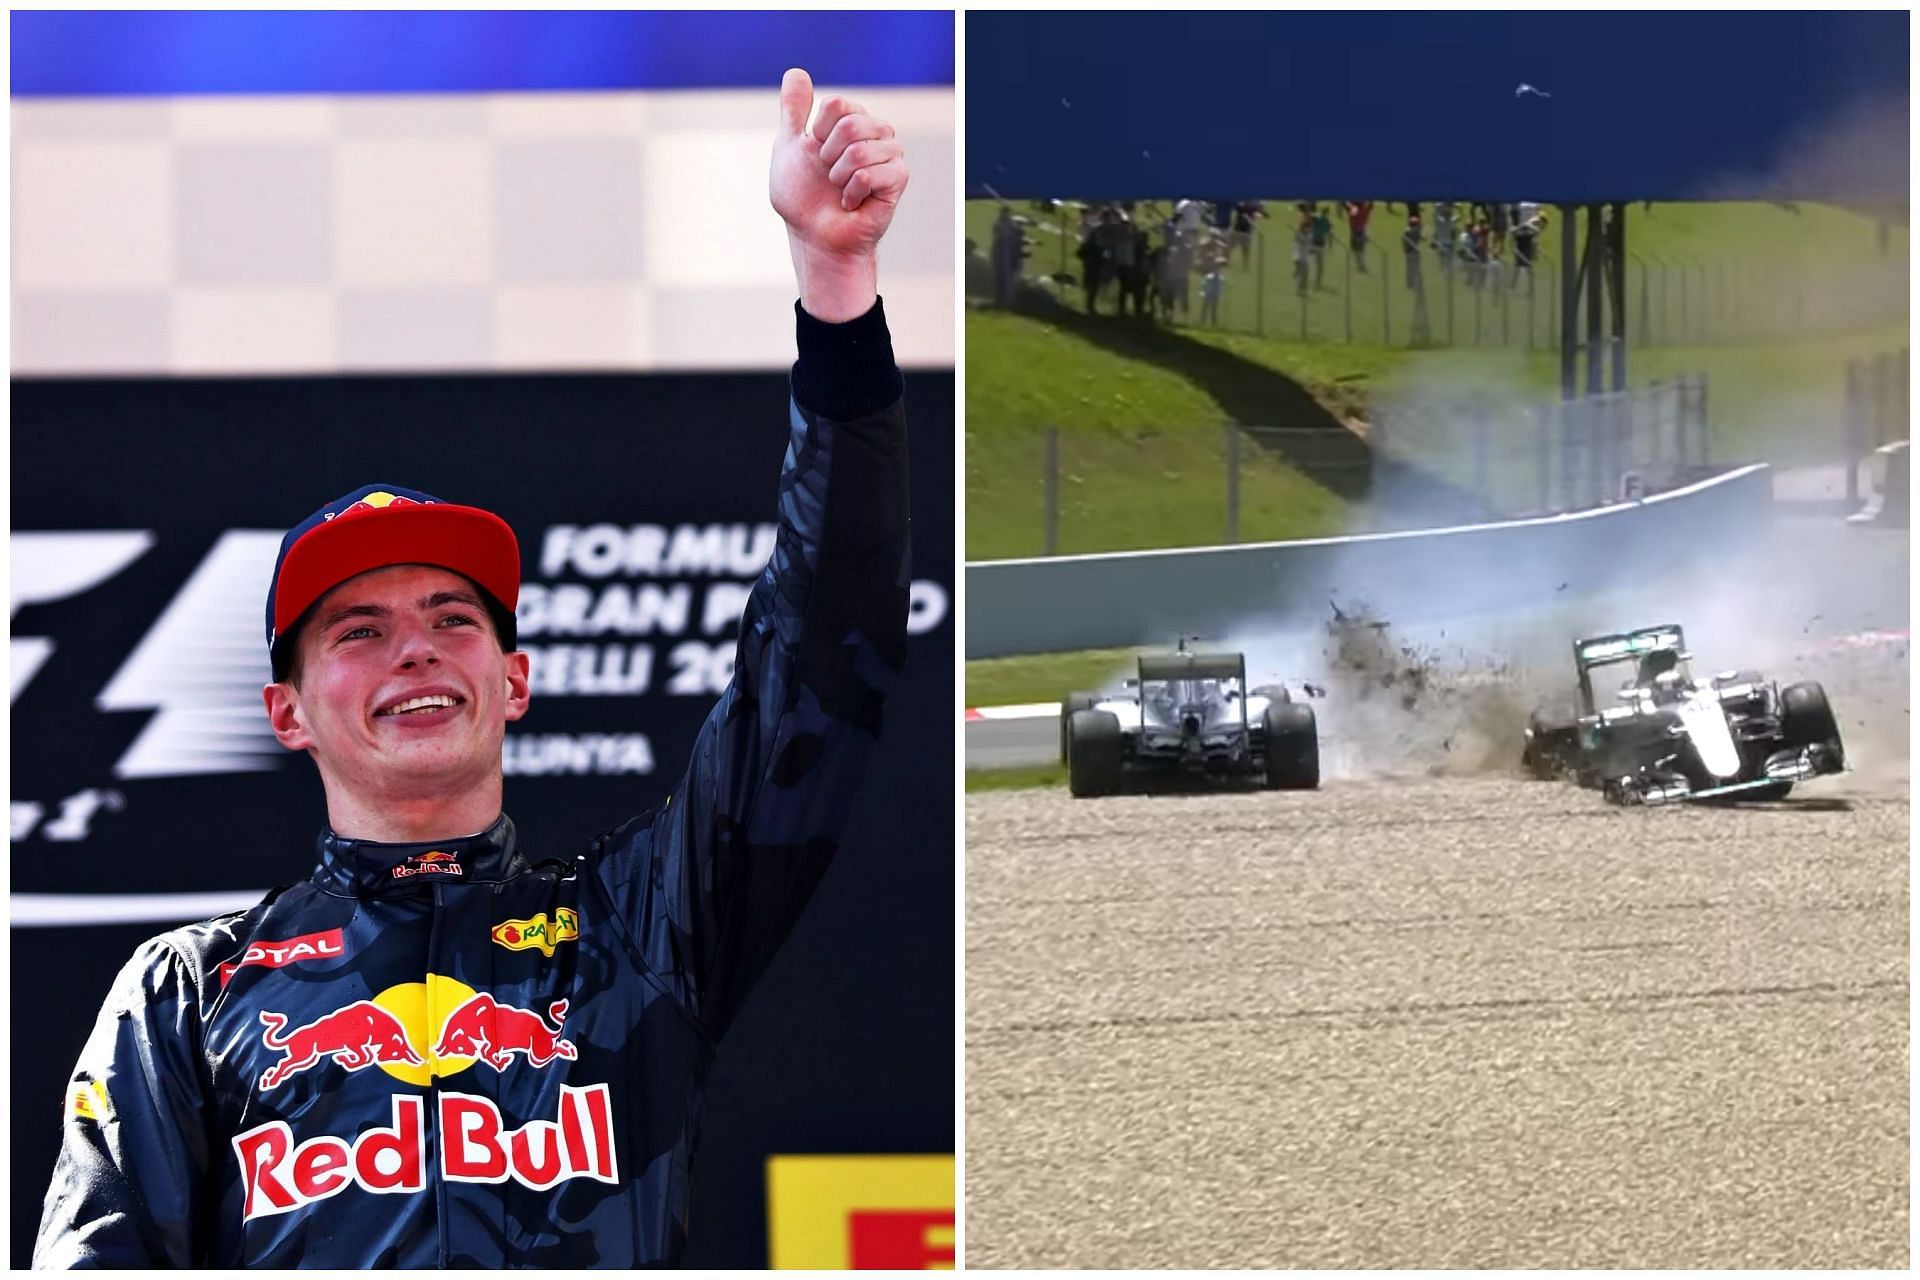 Max Verstappen won his first race in F1 after both Mercedes cars crashed into each other in the 2016 F1 Spanish Grand Prix (Collage via Sportskeeda)